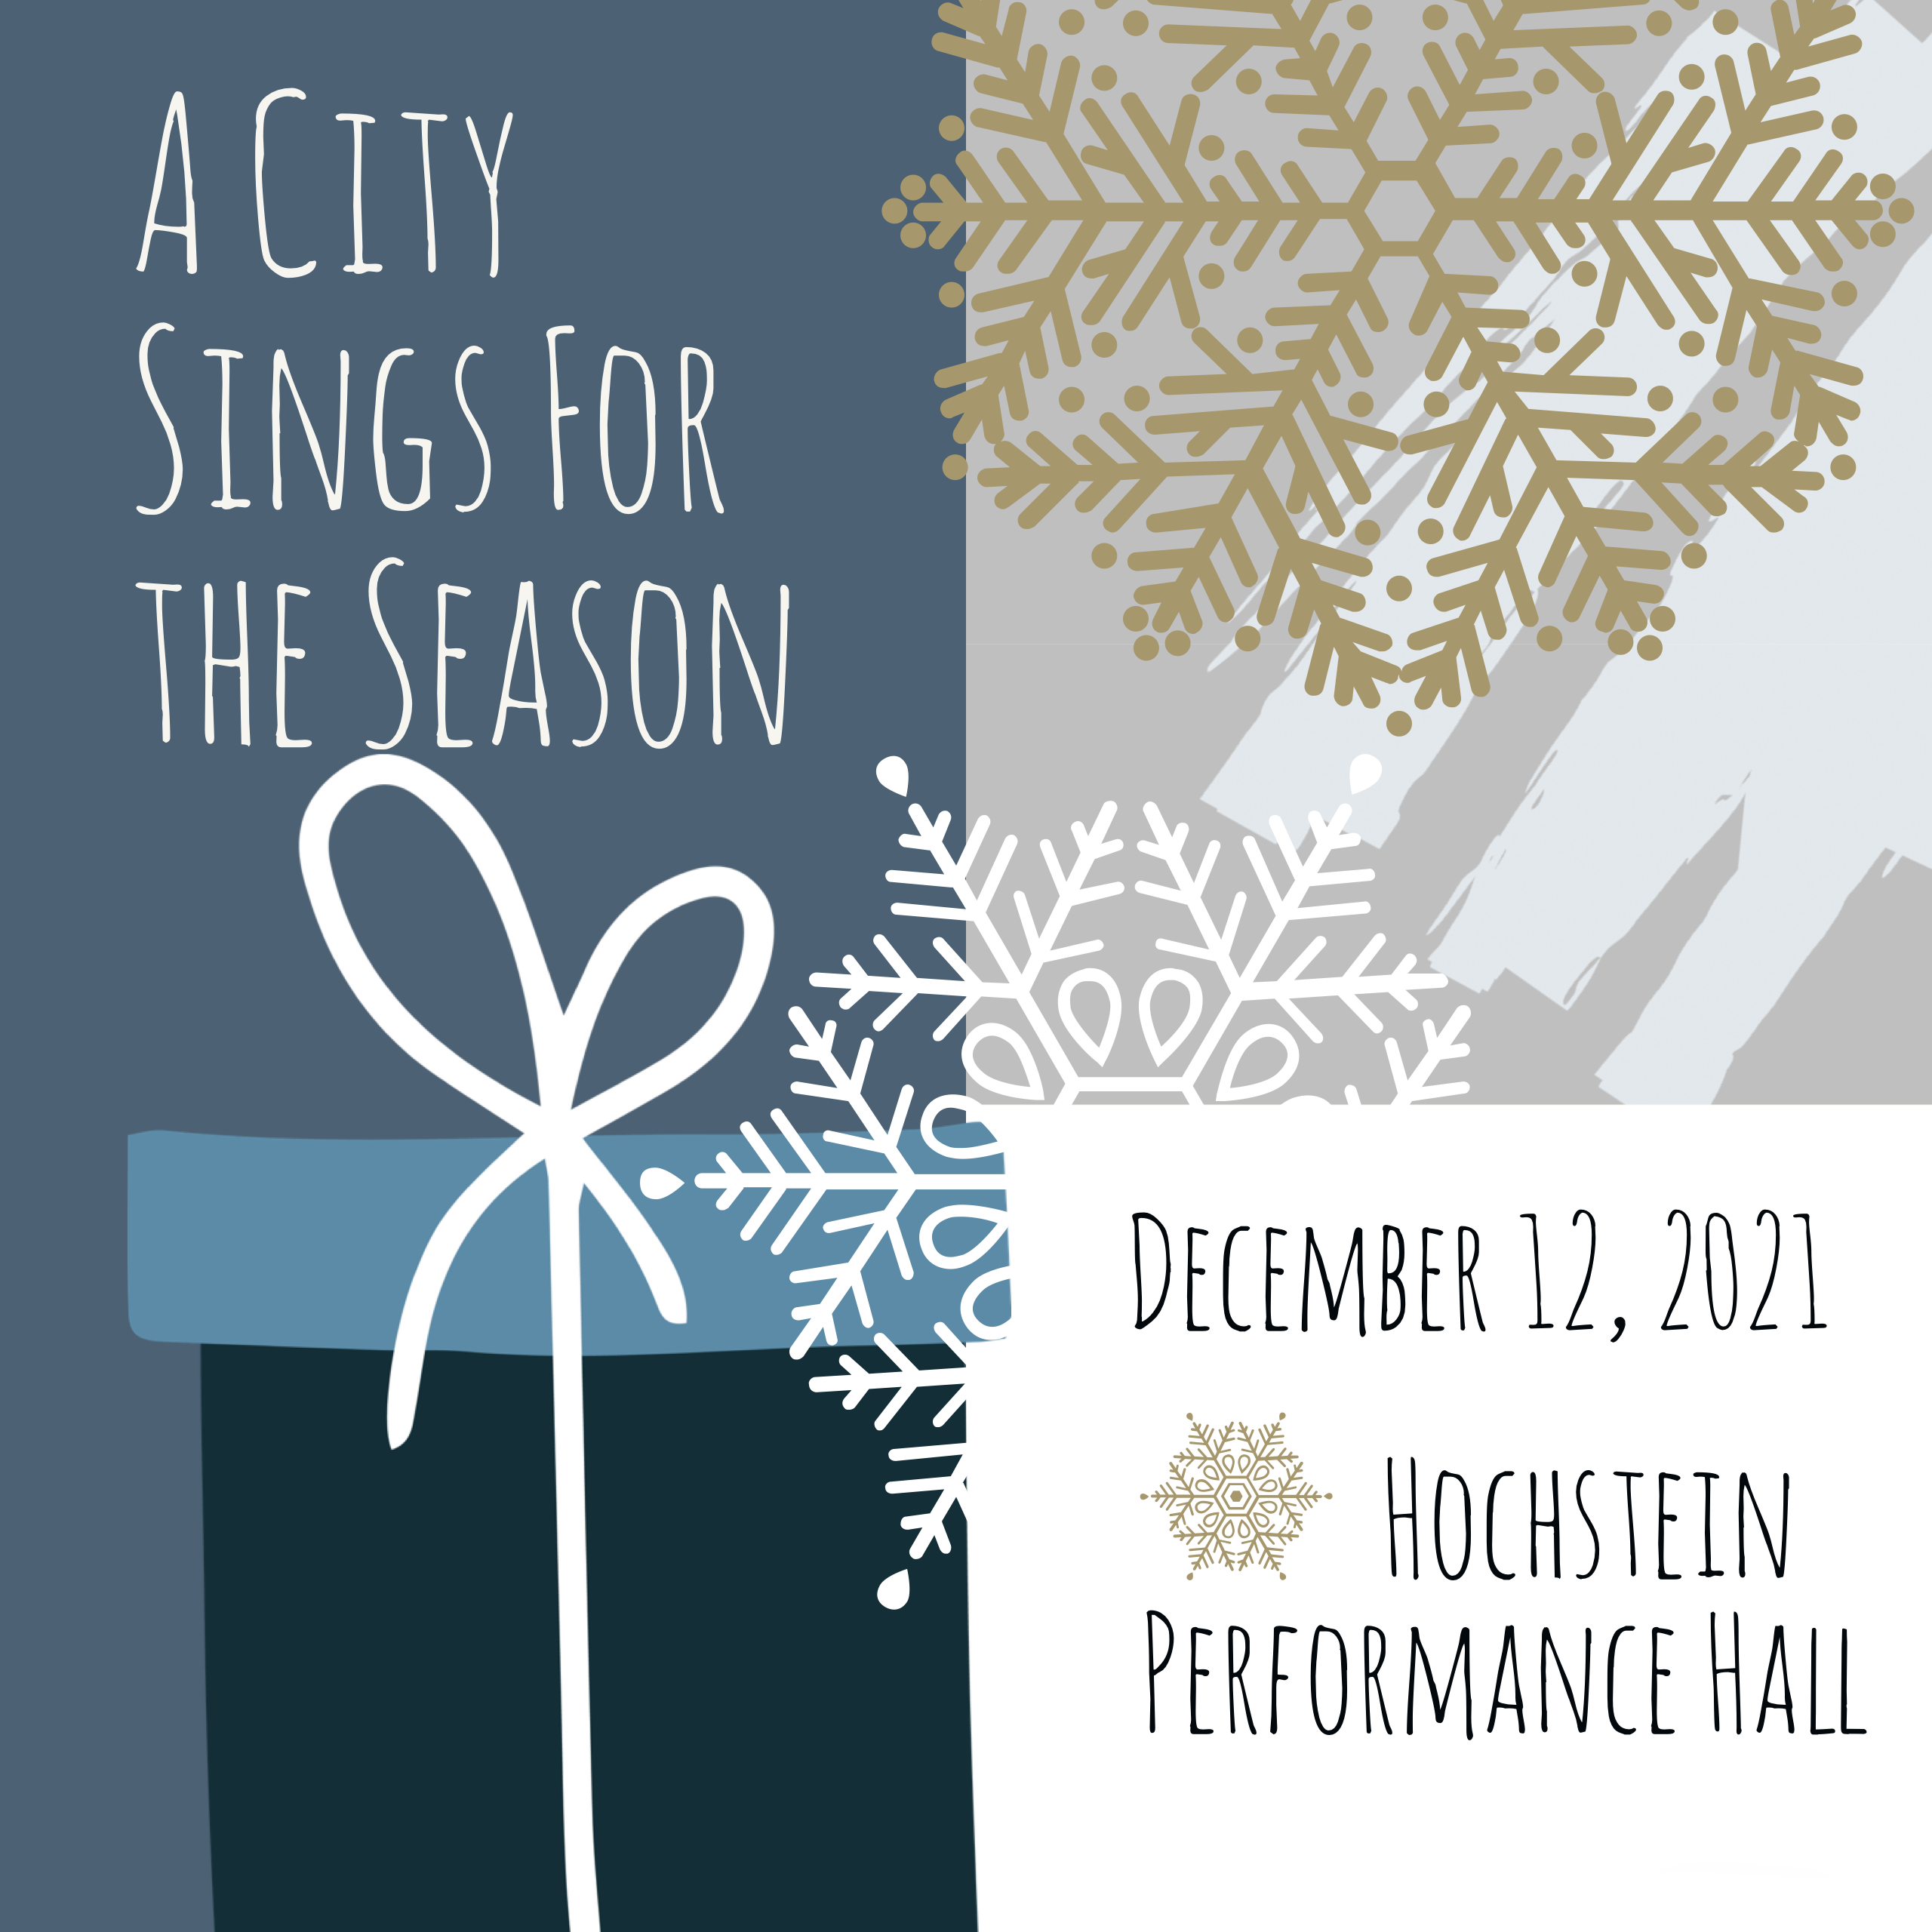 A city sings for the season, december 12, 2021, hochstein performance hall